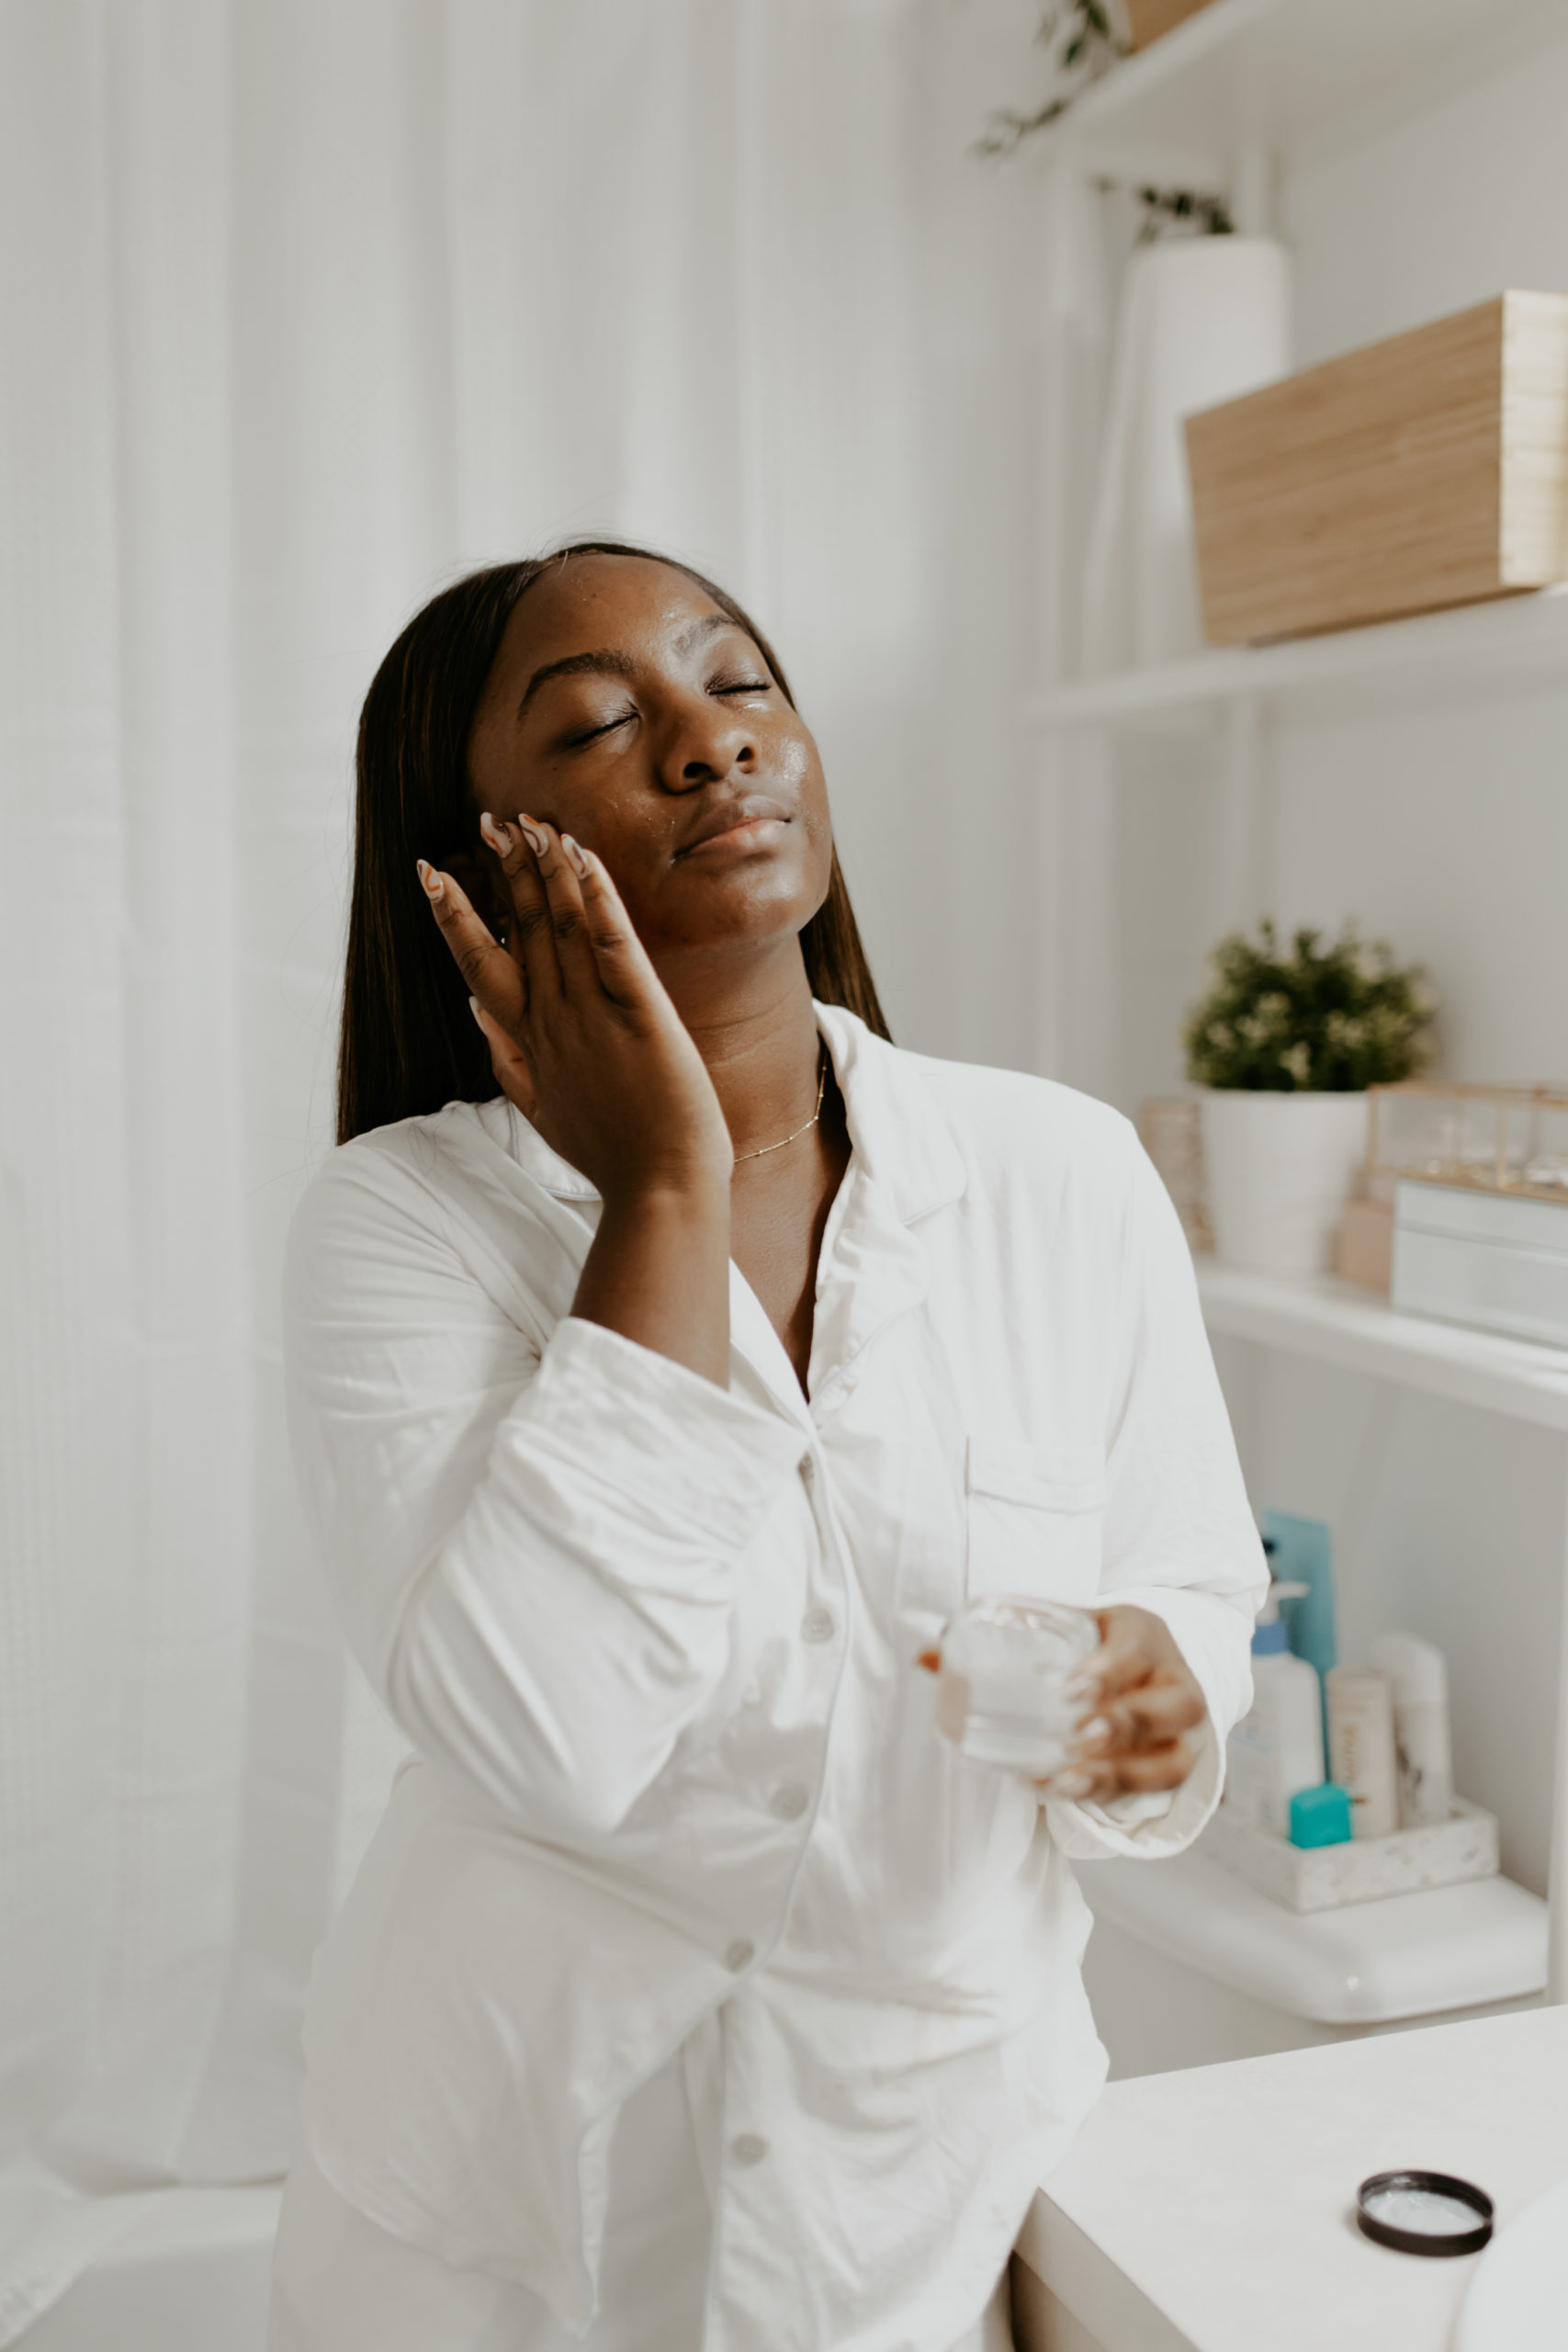 Mindful skincare: Here’s how and why you should try it